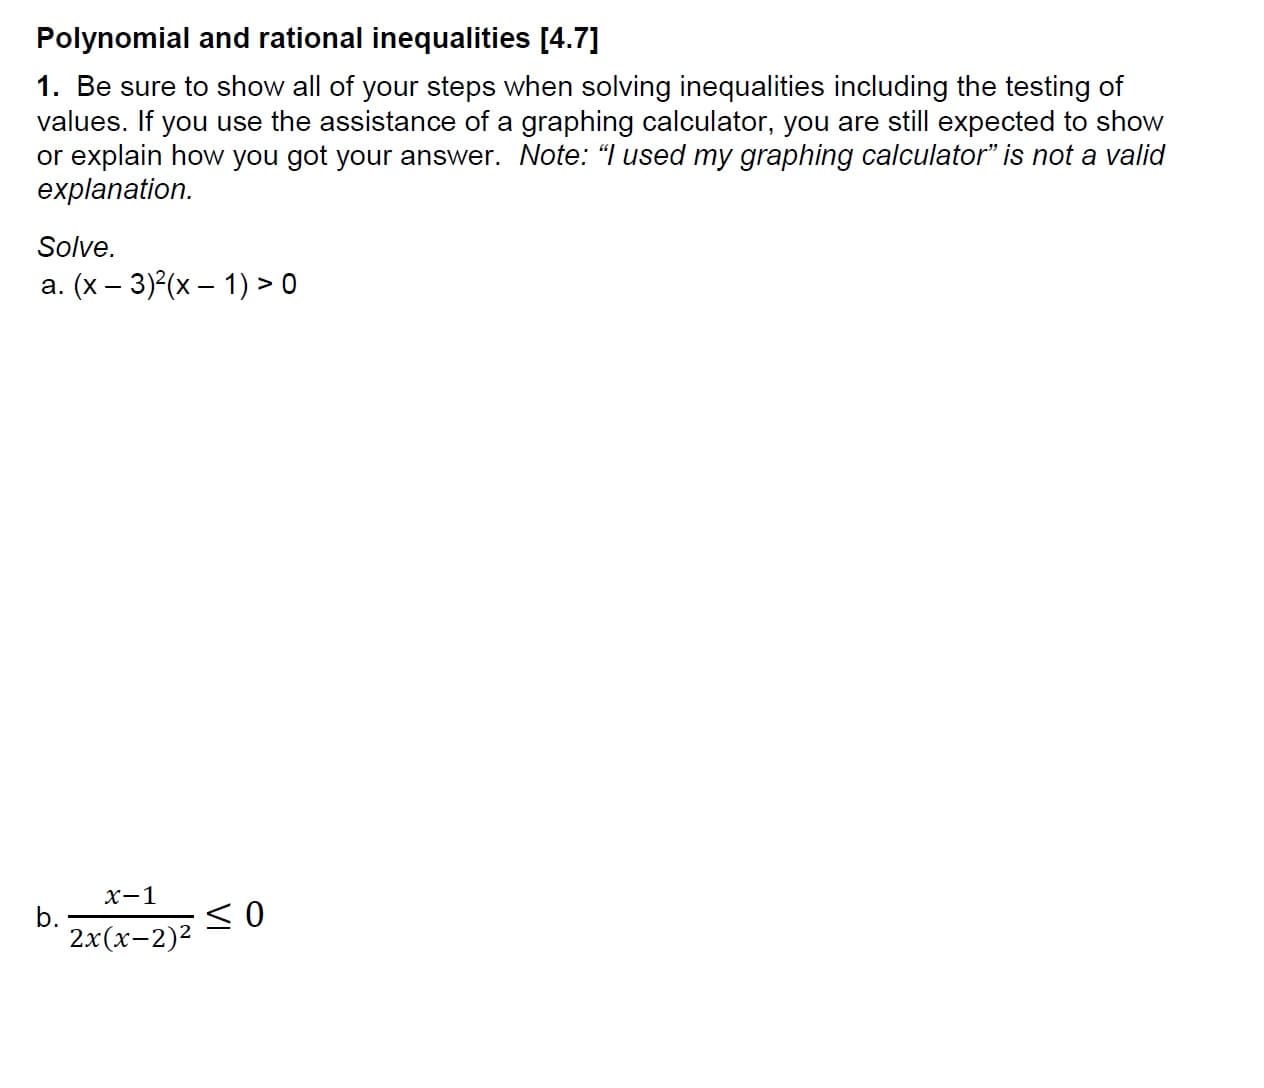 Polynomial and rational inequalities [4.7]
1. Be sure to show all of your steps when solving inequalities including the testing of
values. If you use the assistance of a graphing calculator, you are still expected to show
or explain how you got your answer. Note: "lused my graphing calculator" is not a valid
explanation
Solve.
a. (x - 3)(x )> 0
x-1
2x(x-2)2
